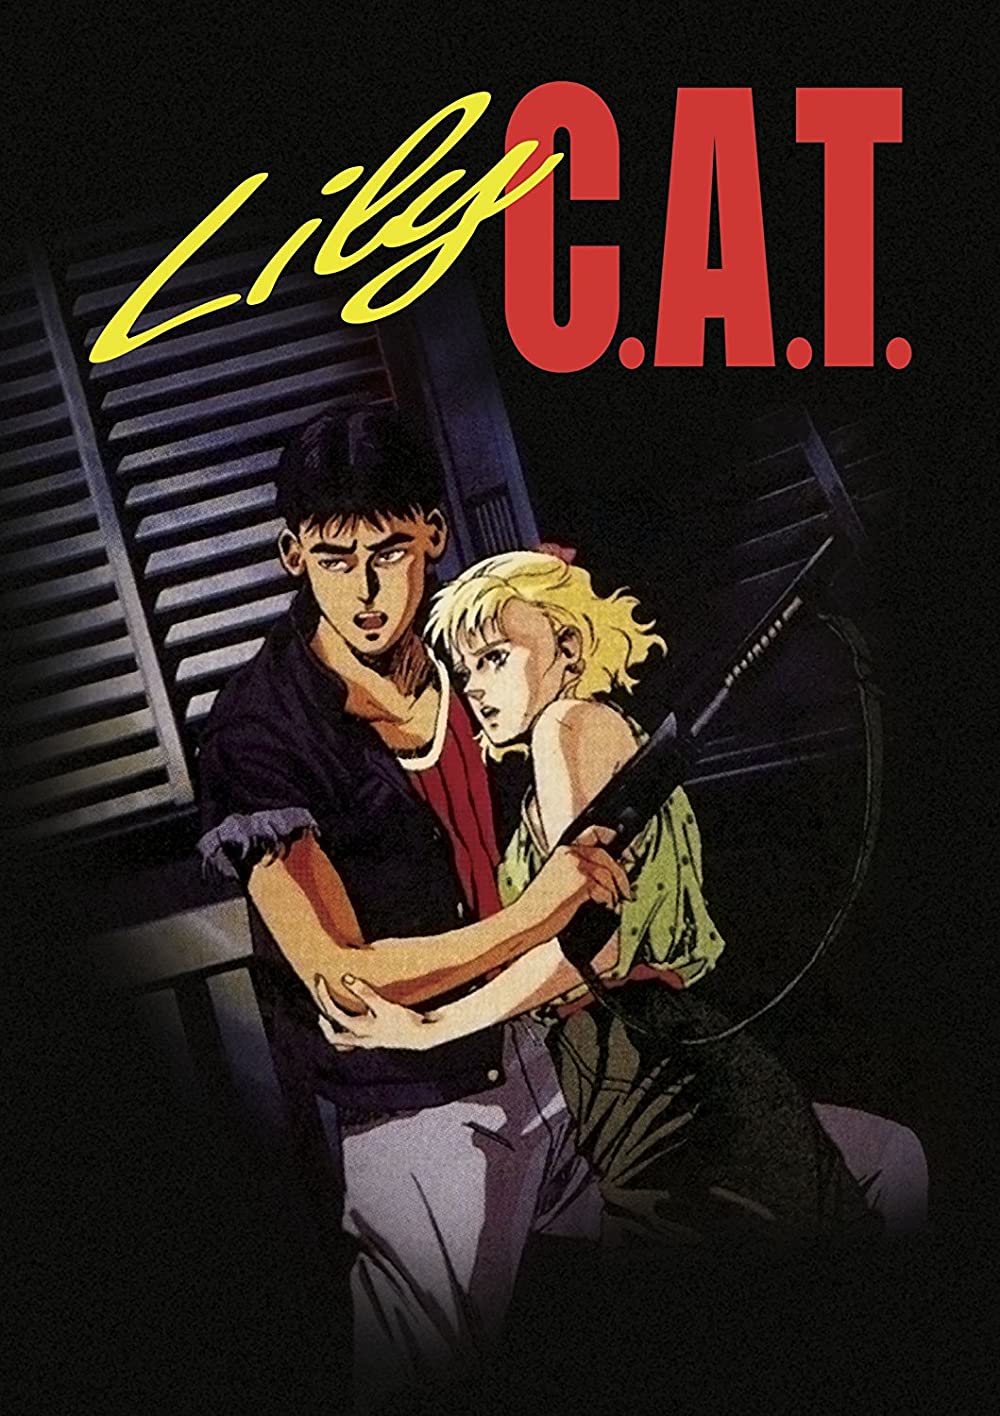 LILY C.A.T. (1987)